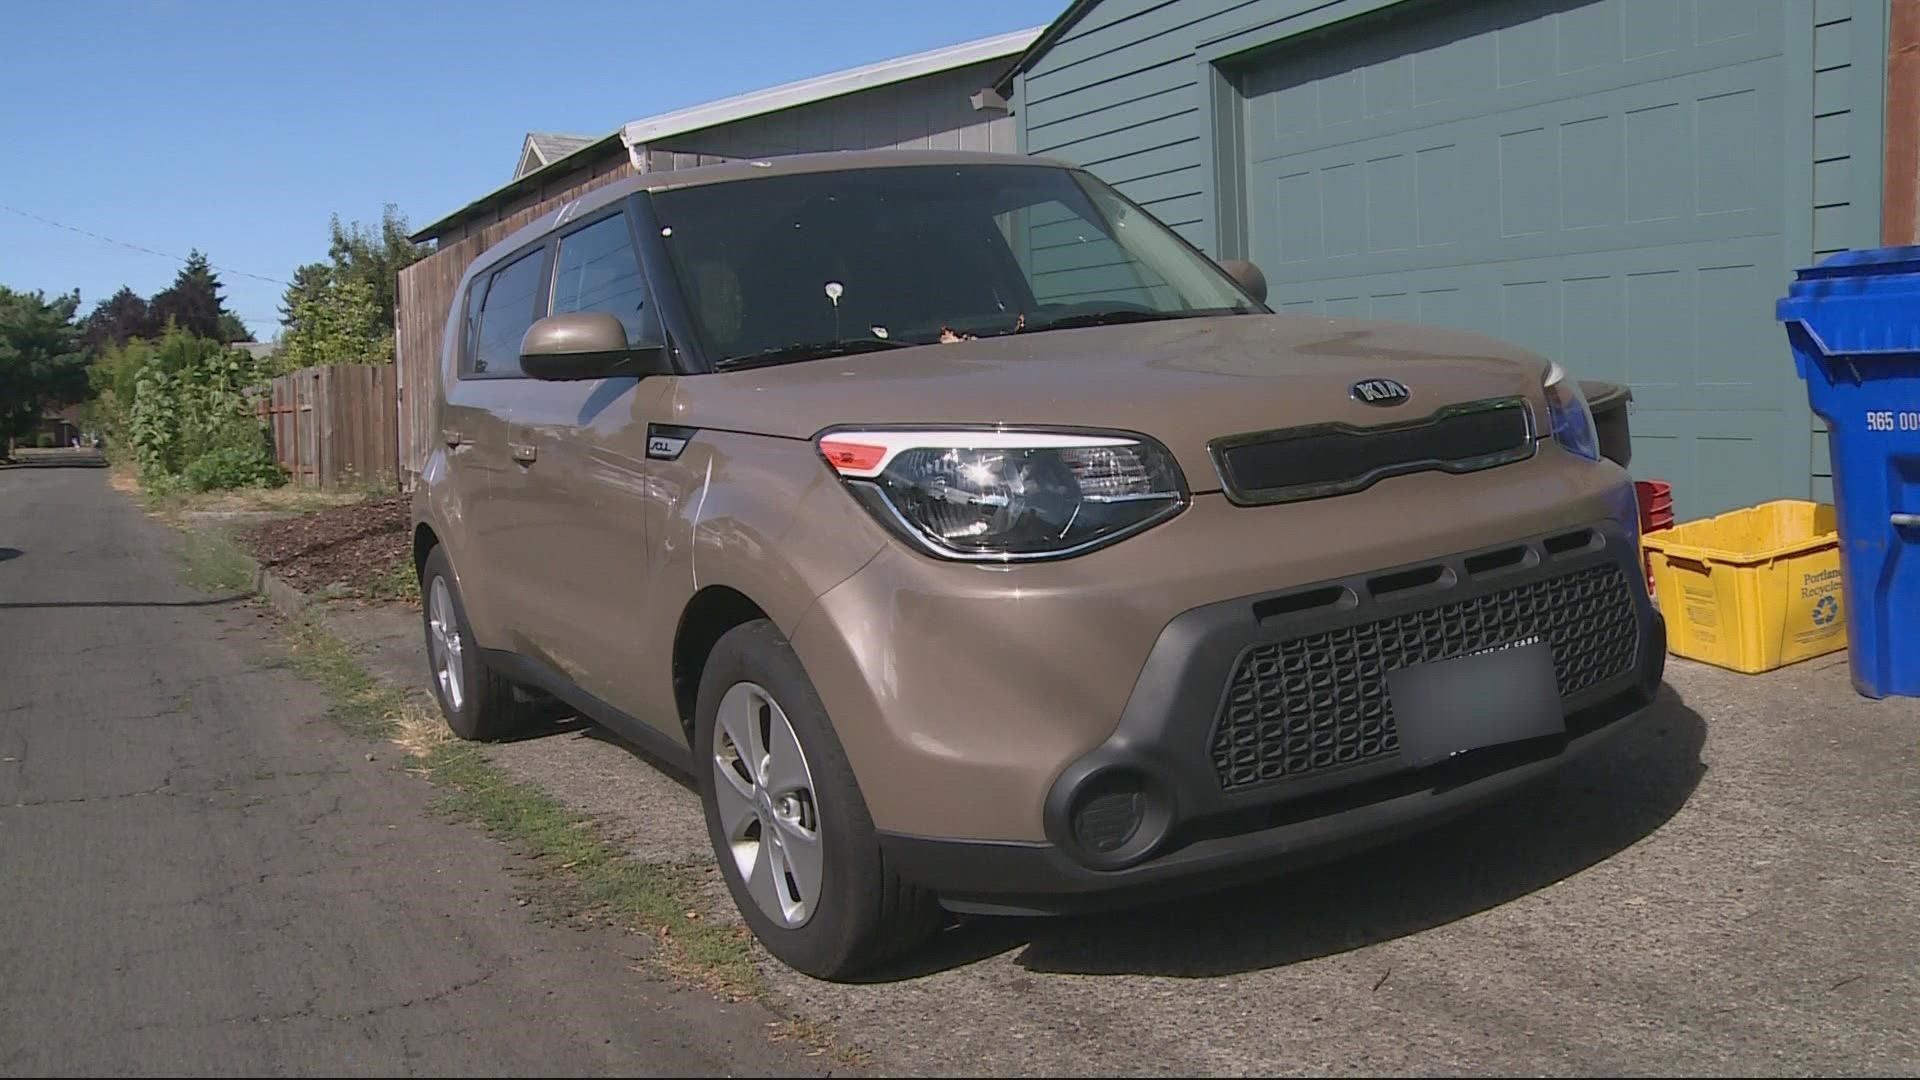 A Portland woman's Kia was stolen and vandalized by a group of thieves who seemed to have been traveling in other stolen Kias, part of a wider trend.